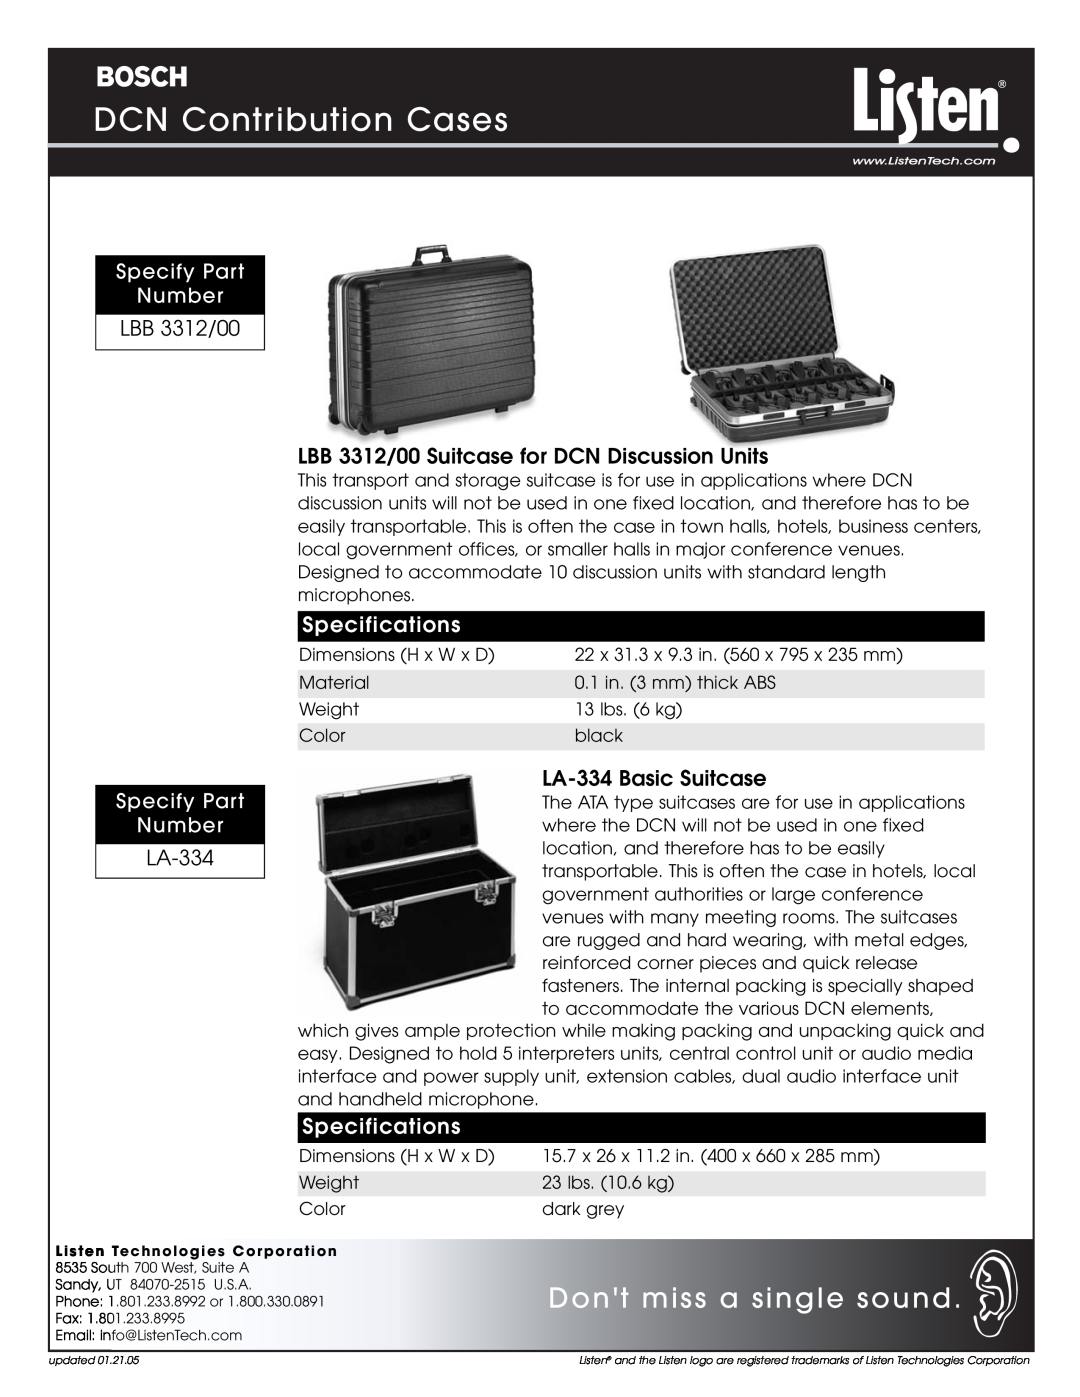 Listen Technologies LA-334 specifications LBB 3312/00 LBB 3312/00 Suitcase for DCN Discussion Units, Specifications 